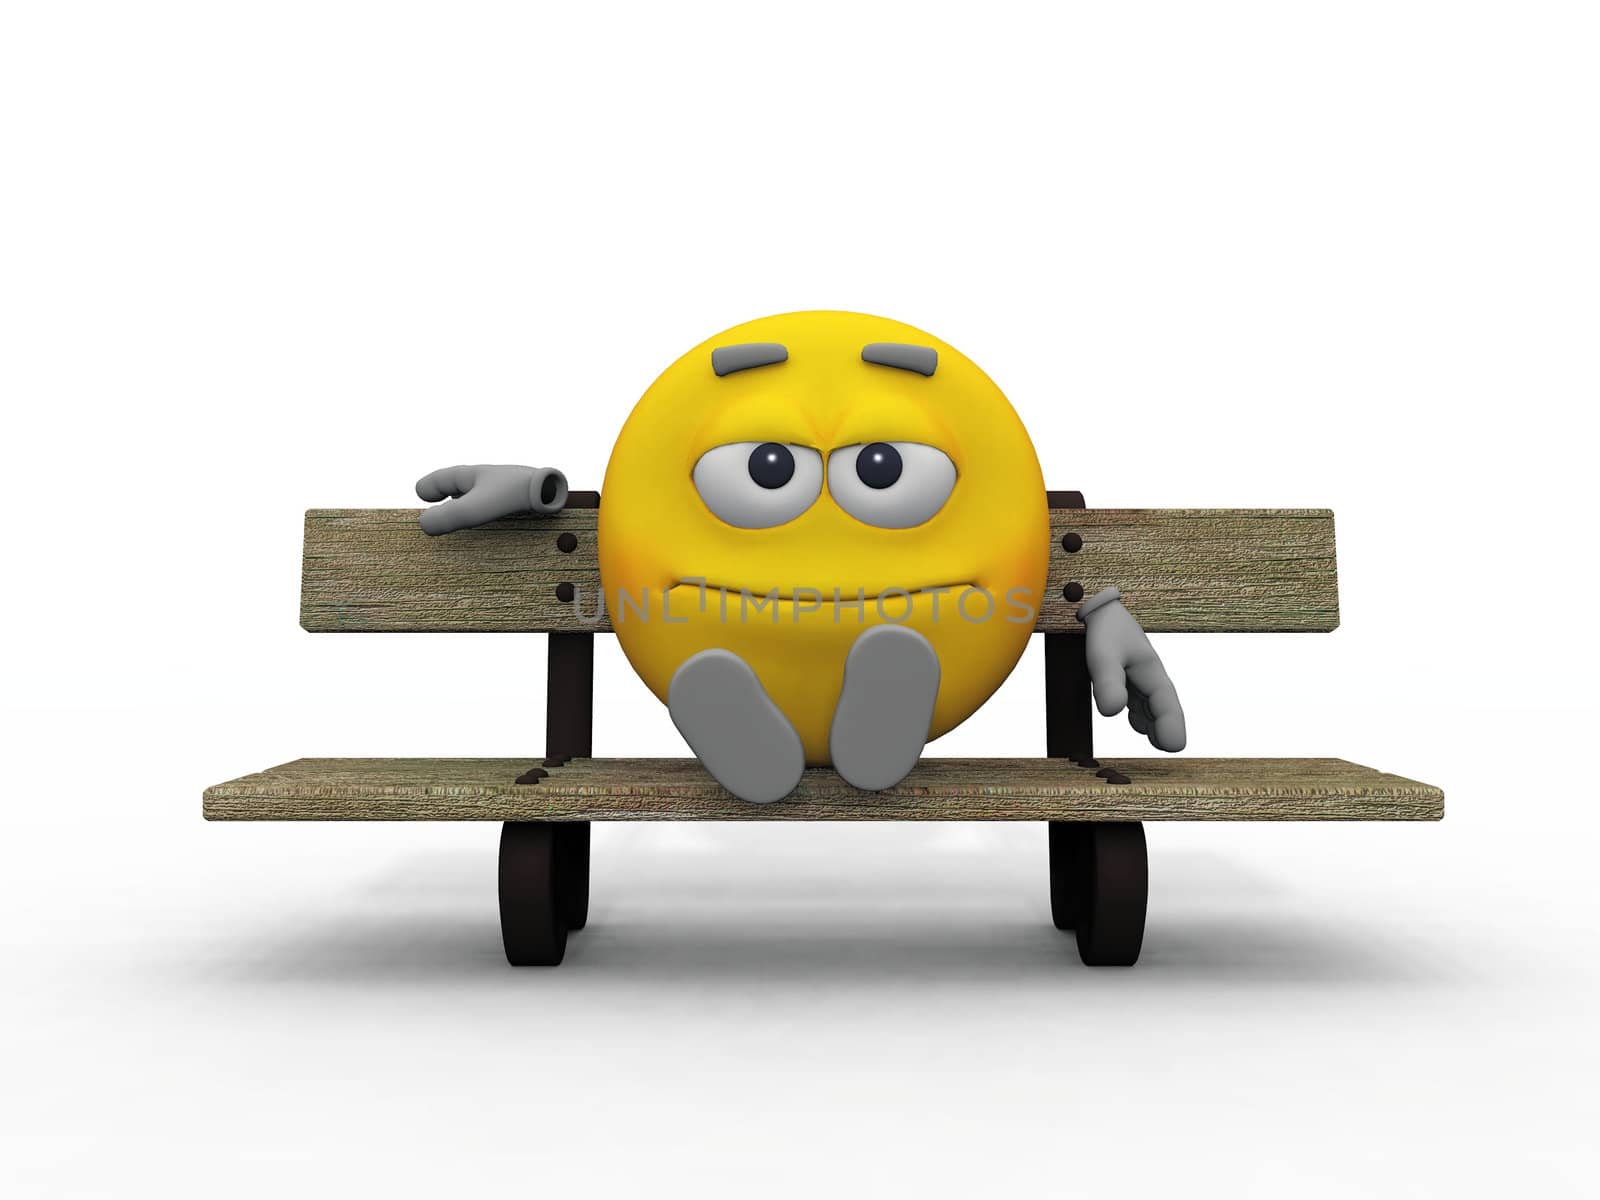 Mr.  Smiley is sitting on a bench